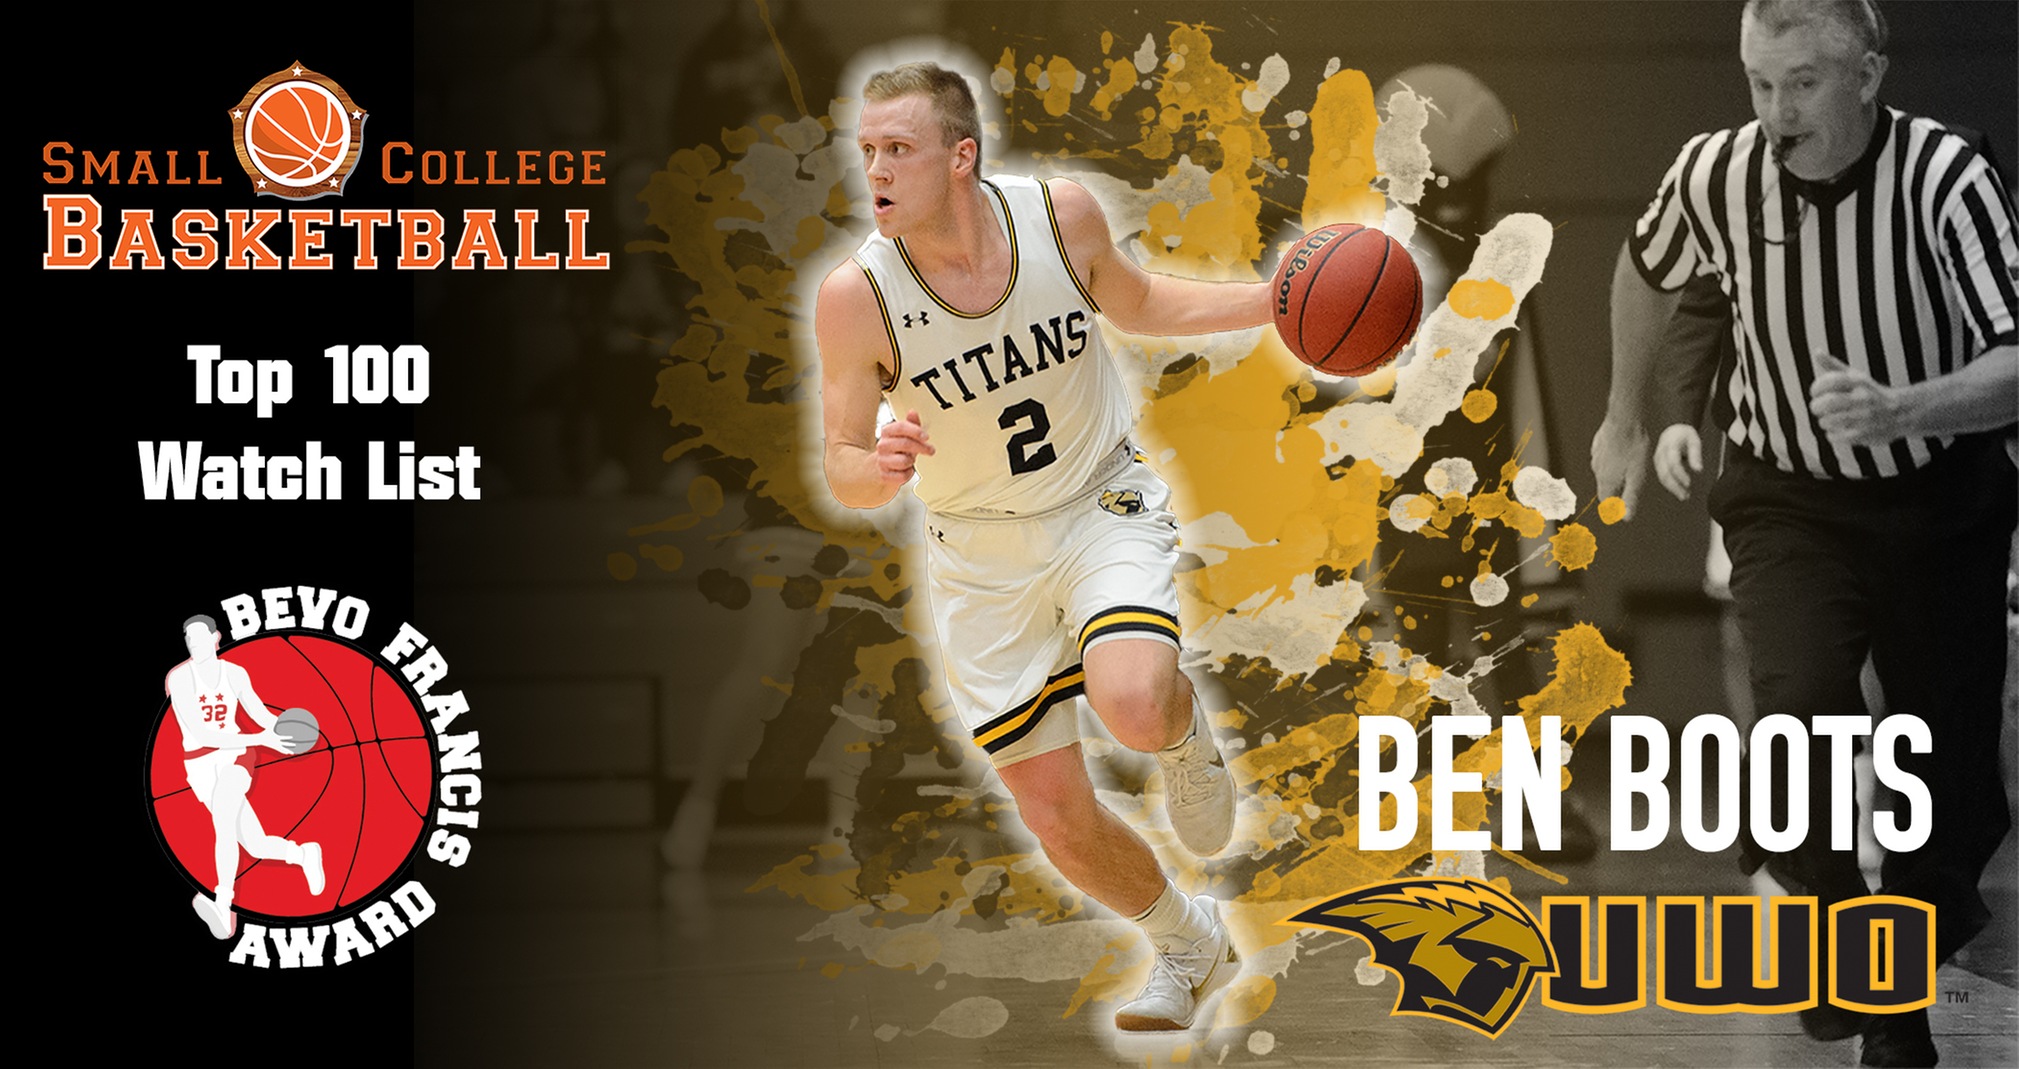 Boots Named To Bevo Francis Award Top 100 Watch List